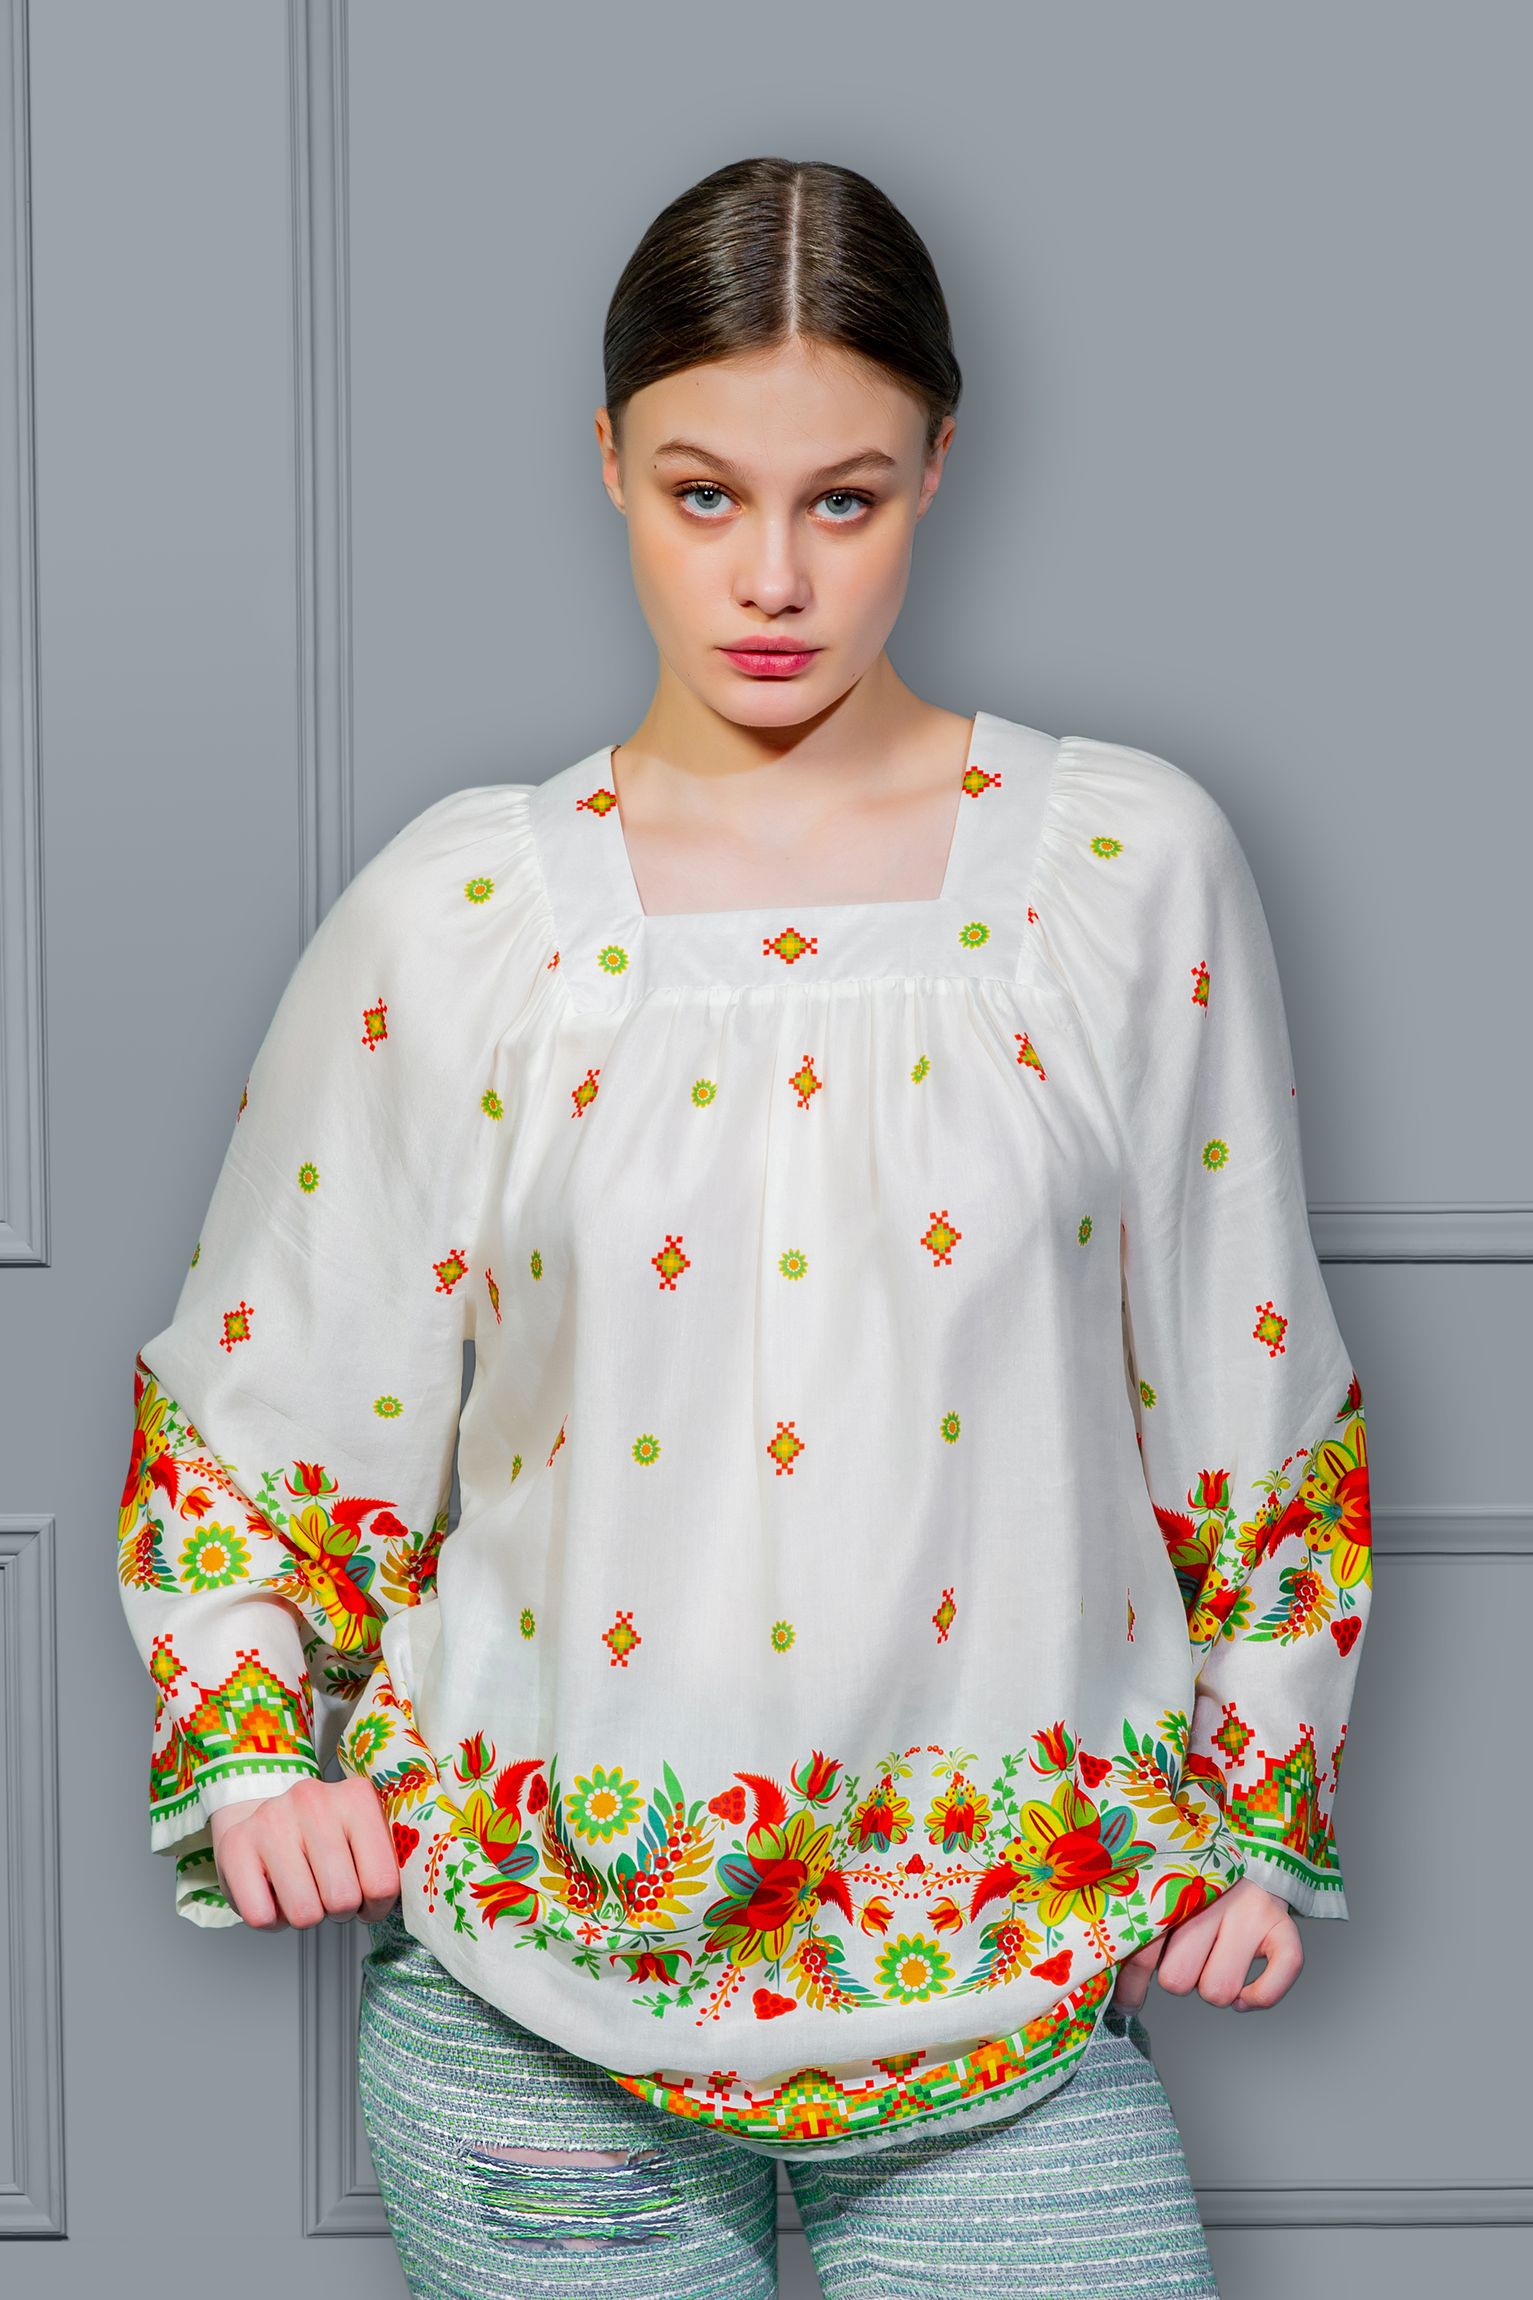 Blouse Petrykivka white - colored embroidered shirt 70% cotton 30% silk